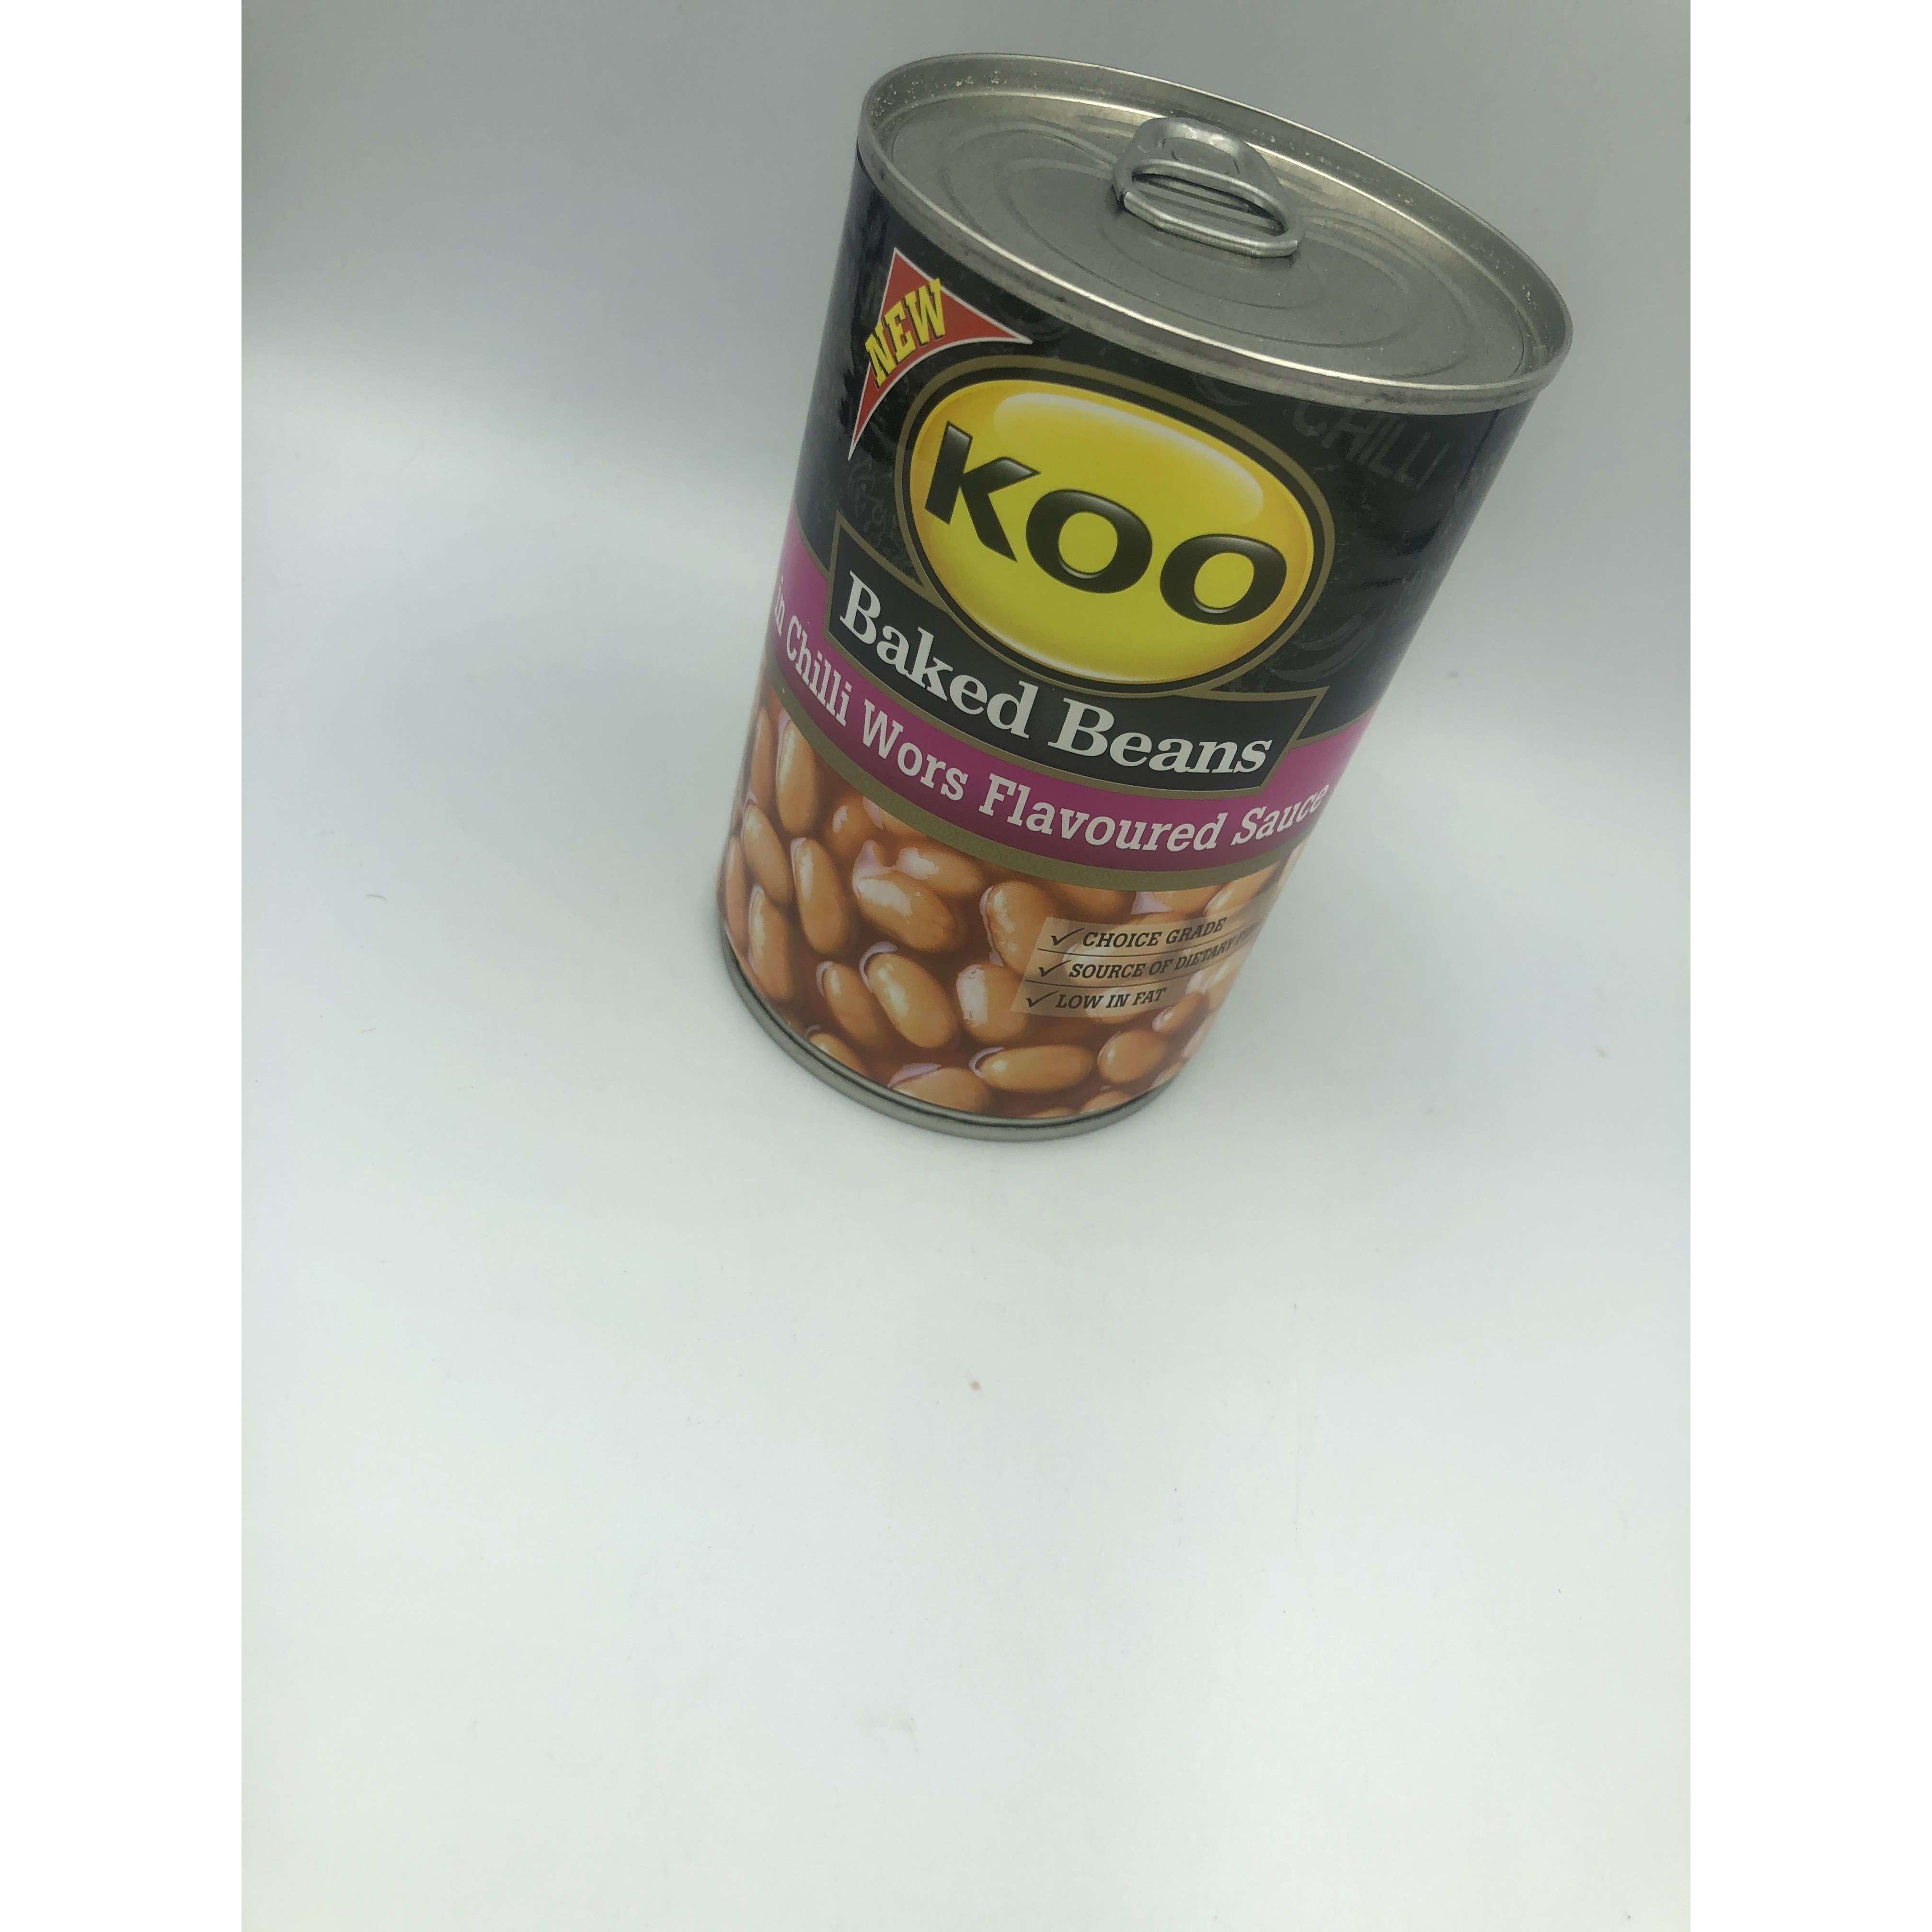 KOO BAKED BEANS IN CHILLI WORS FLAVOURED SAUCE 410G